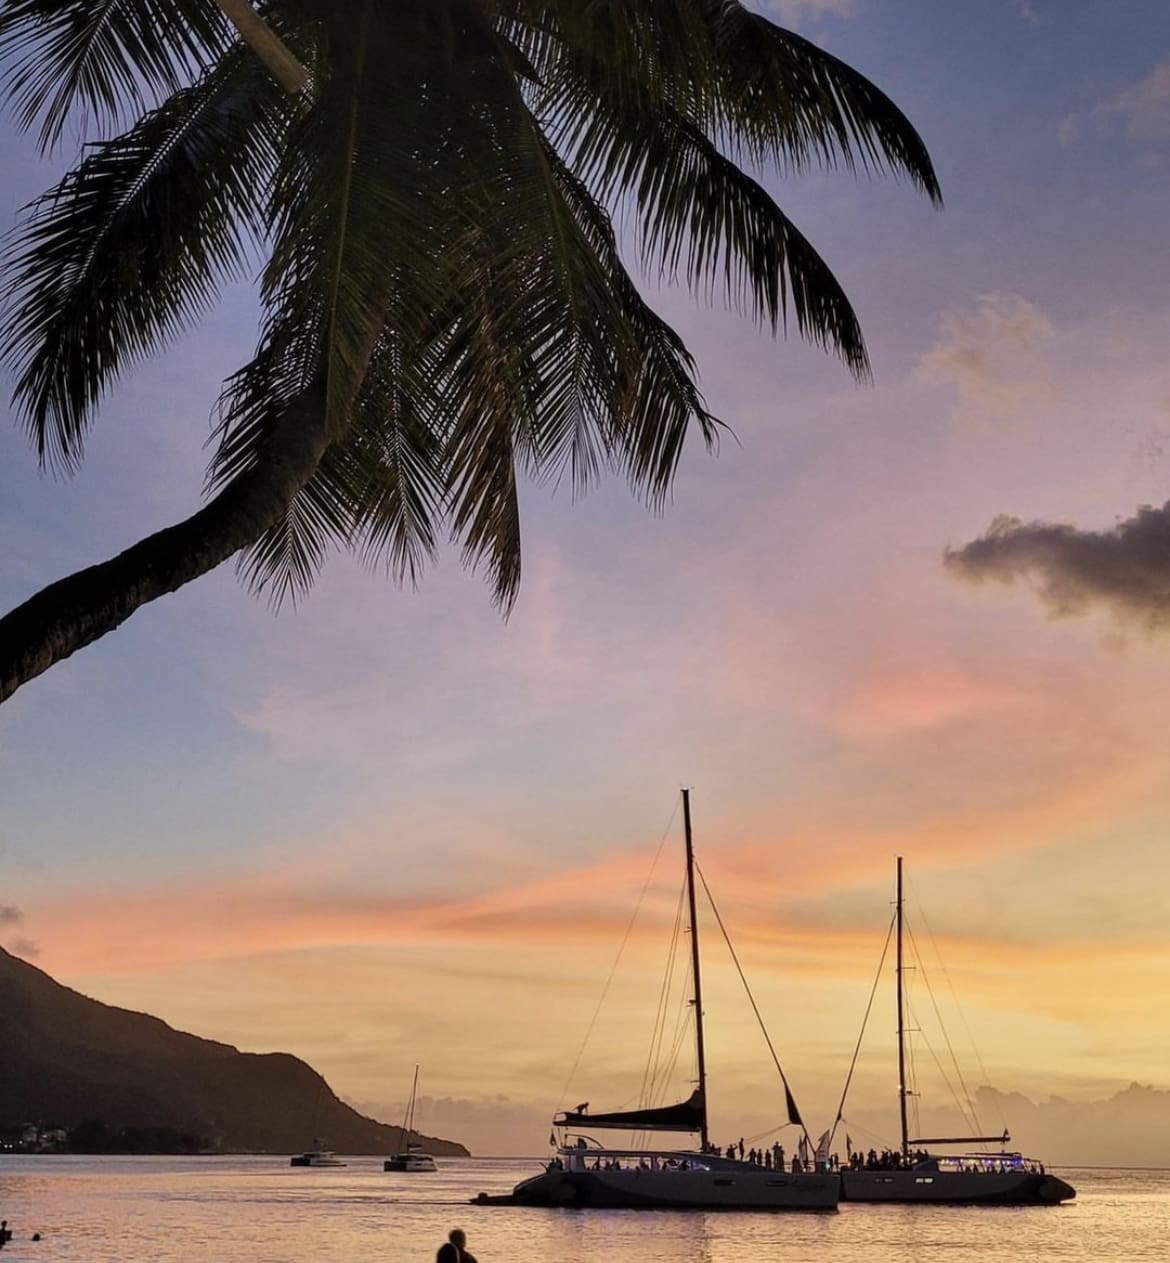 Yachts cruise the shallow waters off Beau Vallon Beach, Seychelles